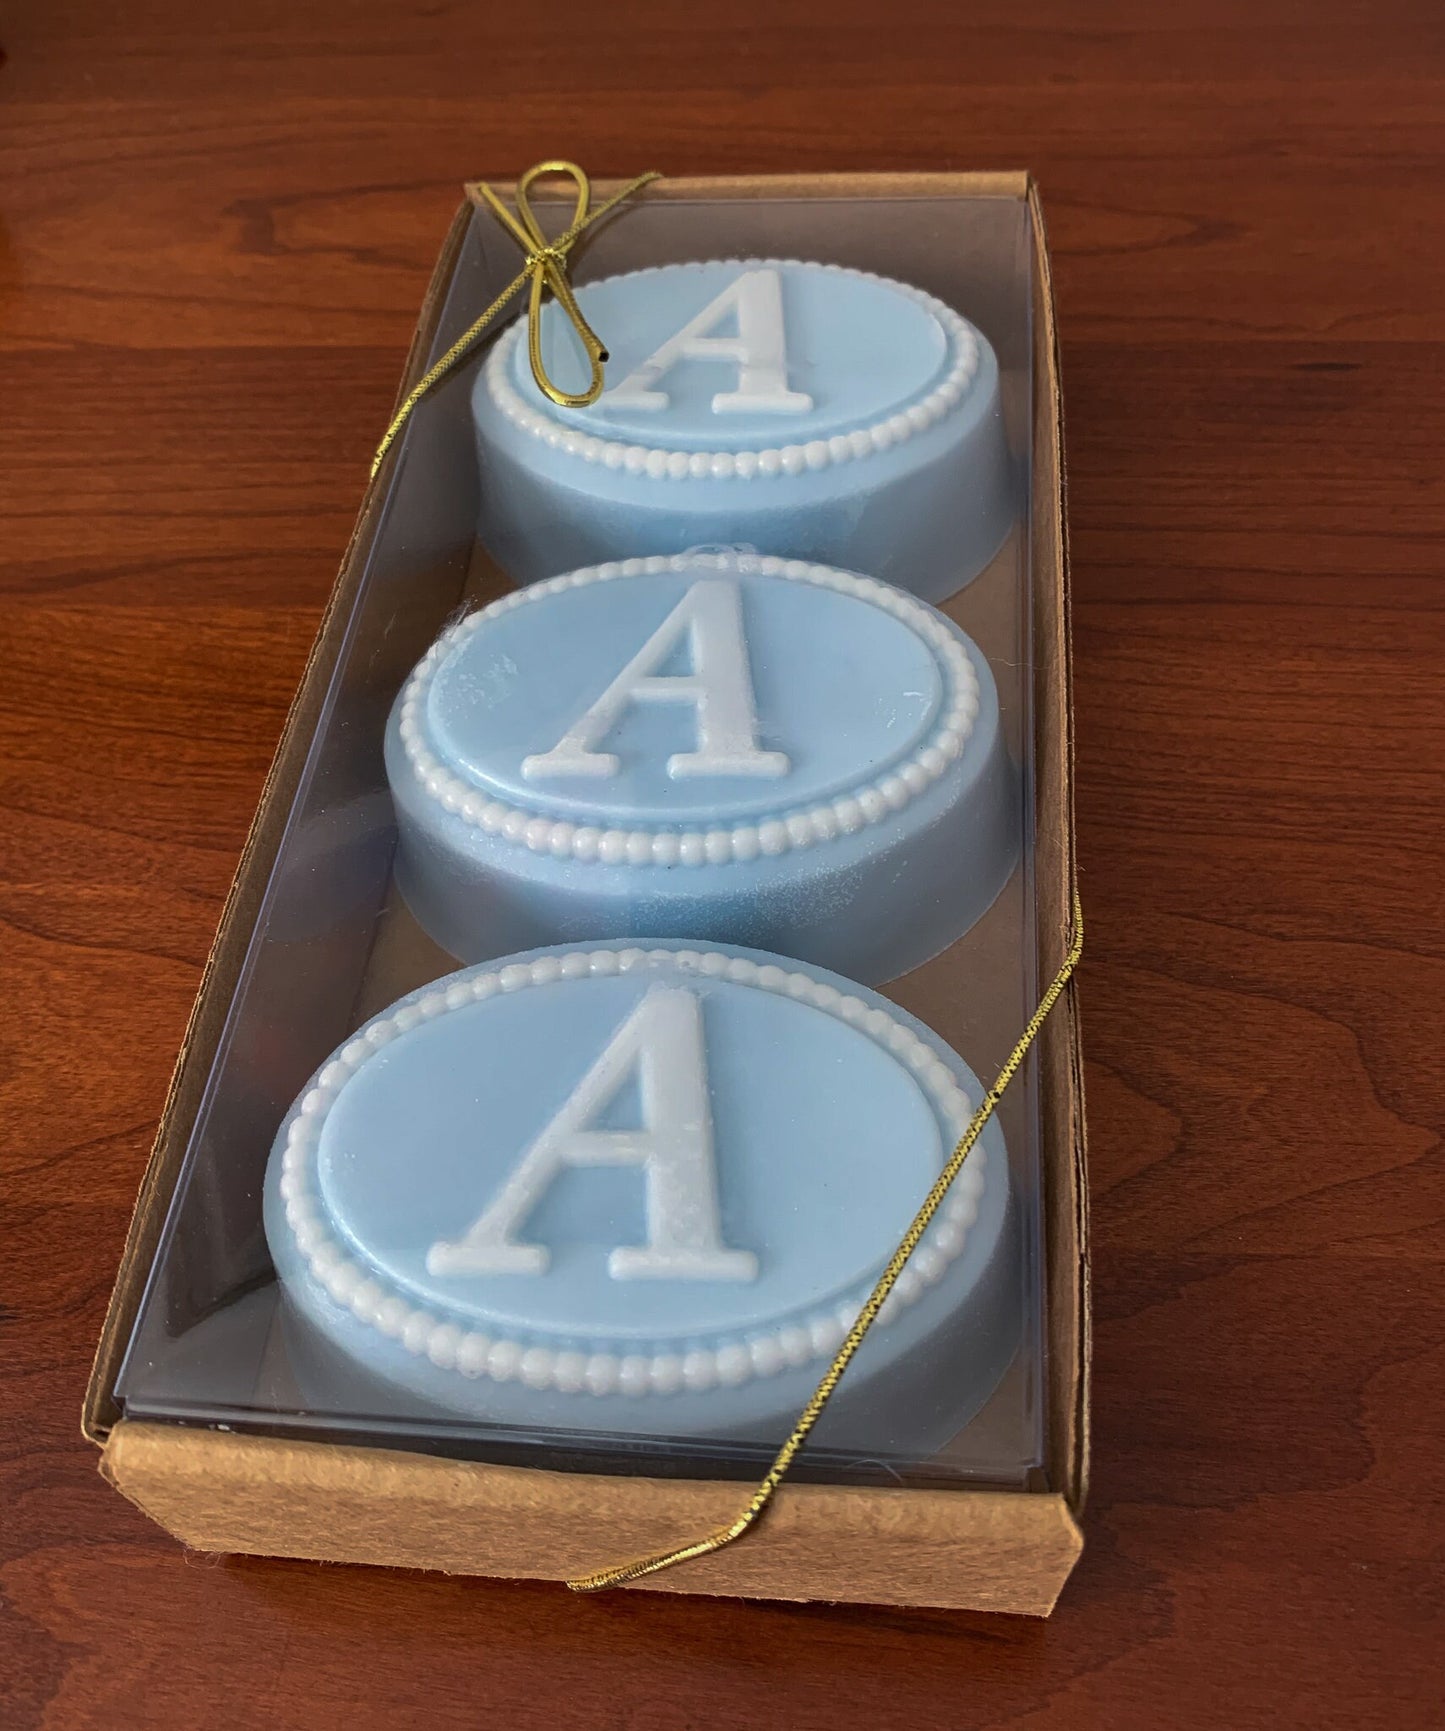 Monogram Soap, Personalized gift, Shea Butter Soap